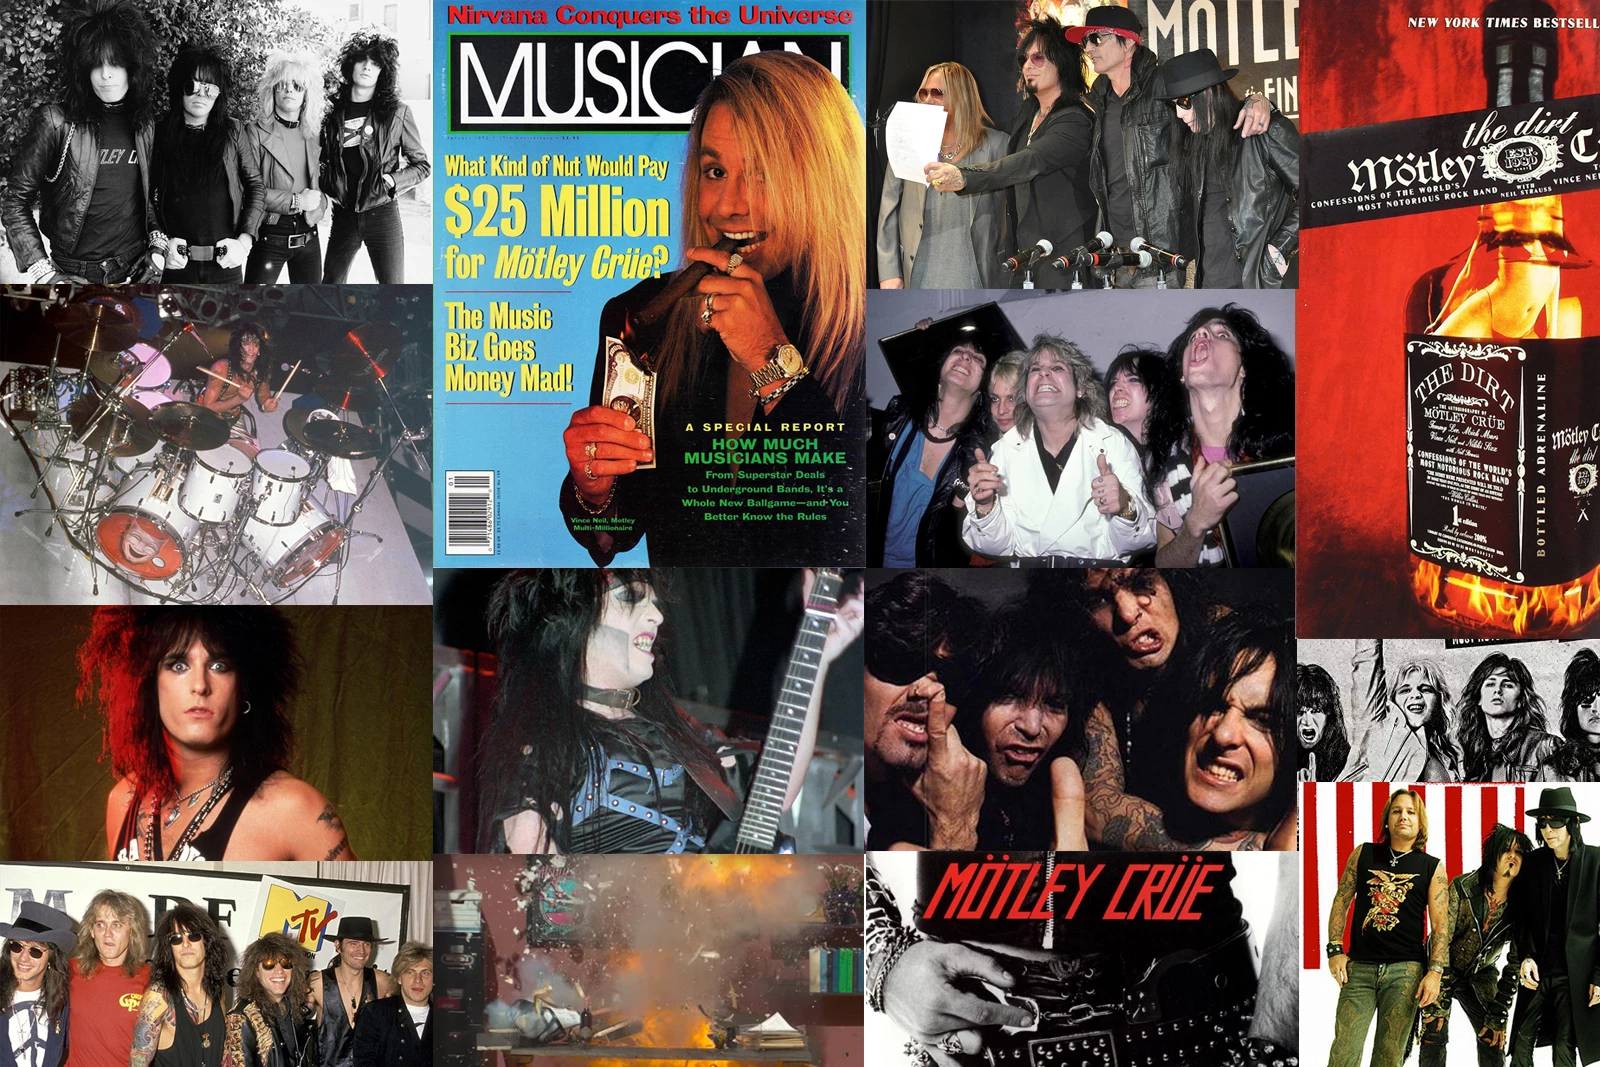 My Sunday Song – “Live Wire” by Motley Crue – 2 Loud 2 Old Music